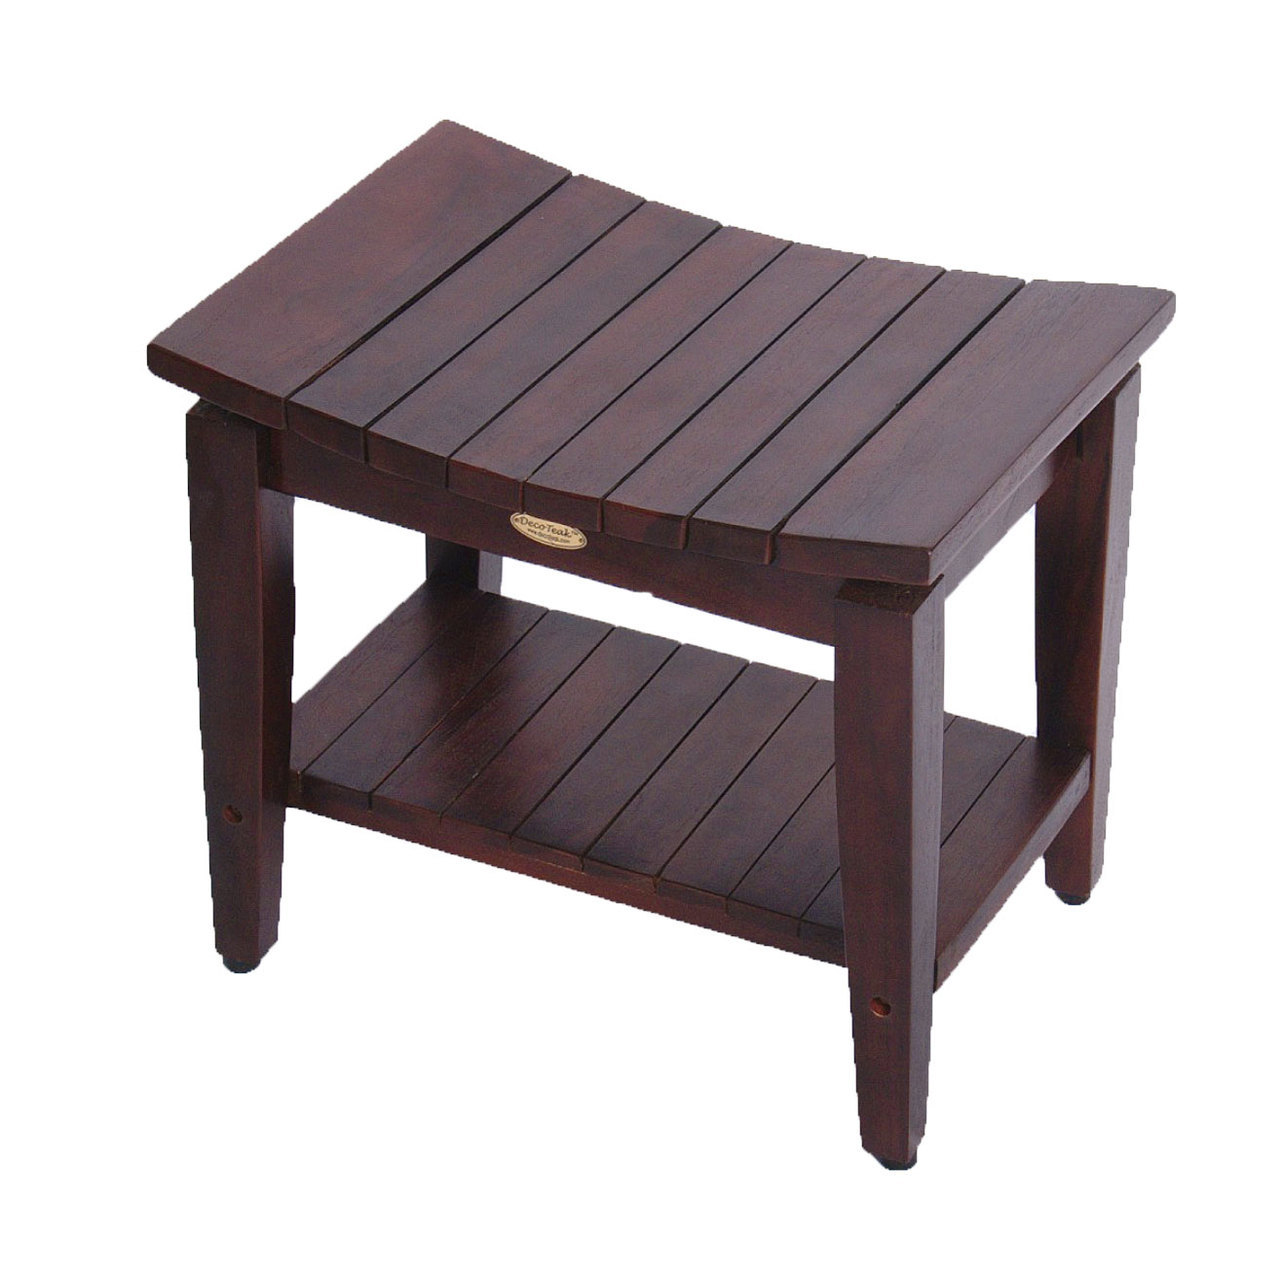 DT164 20" Teak Shower Bench with Shelf - Click Image to Close